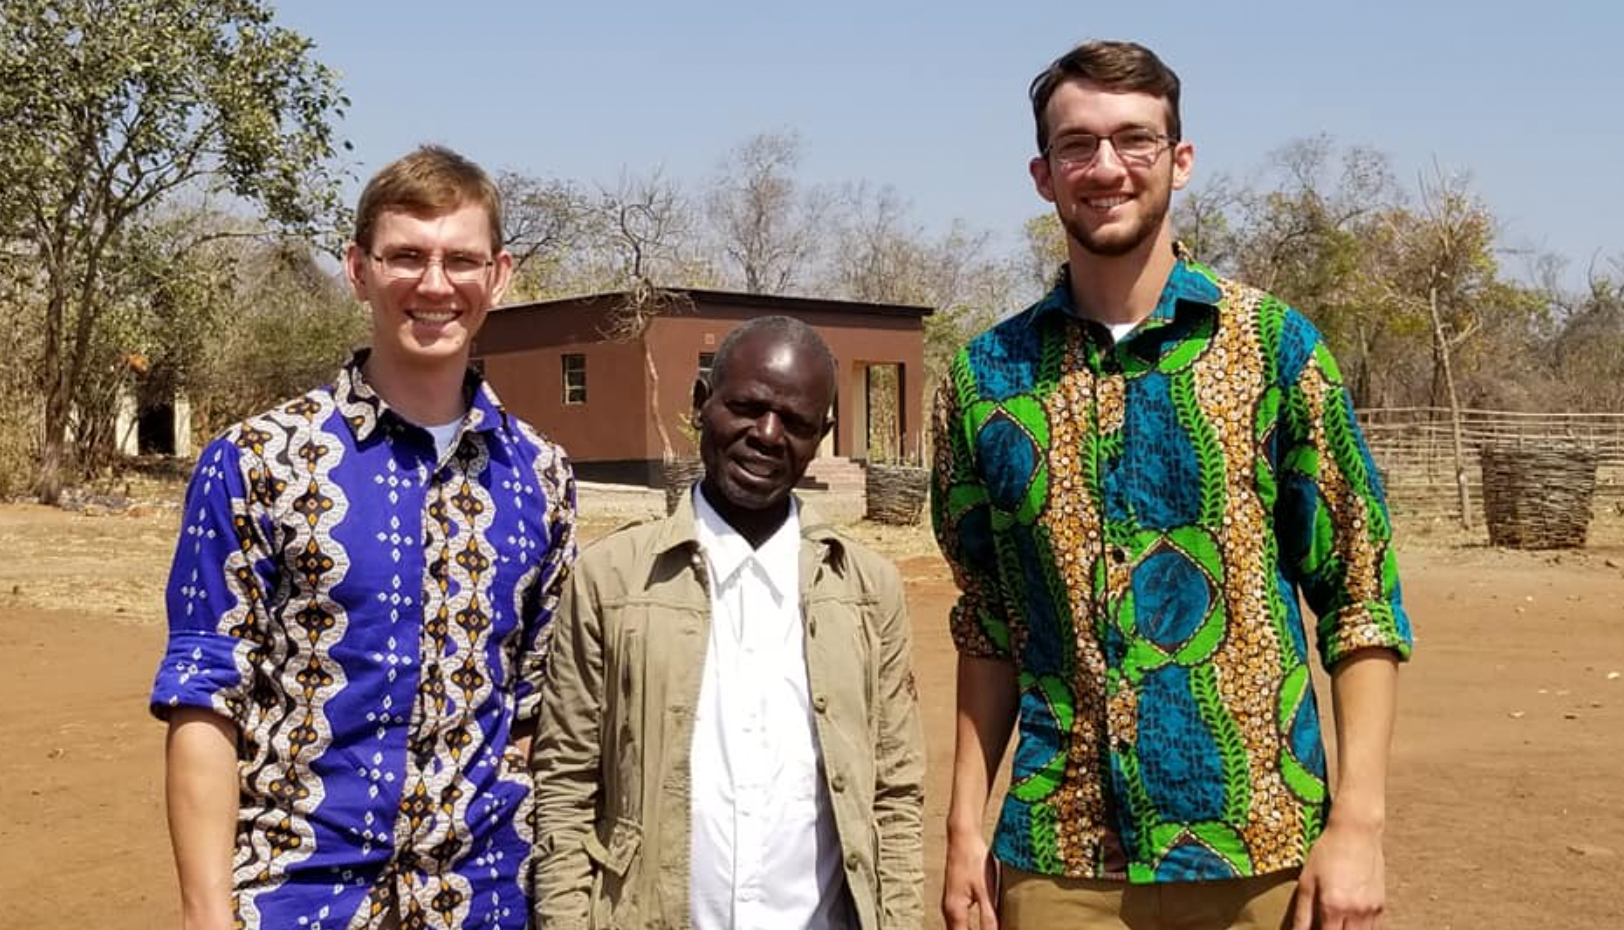 BJU students with a man they met while on the African mission team